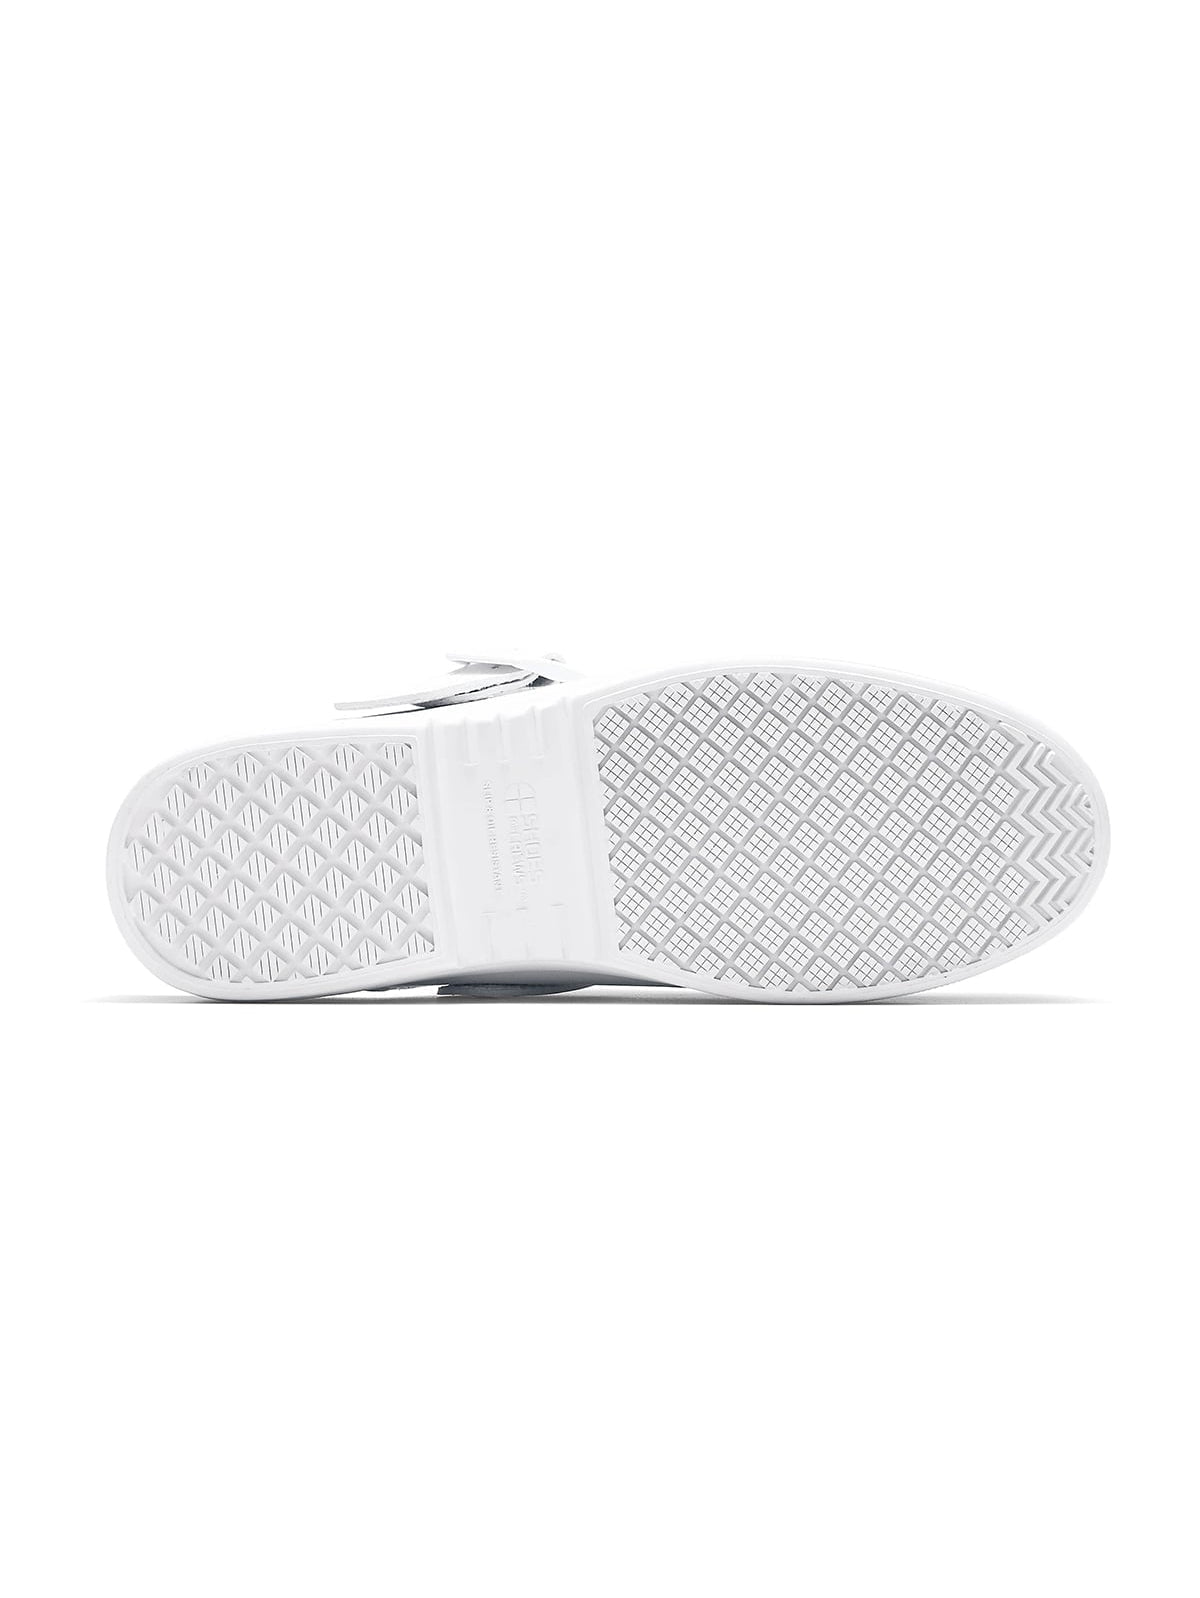 Unisex Work Shoe Triston II White by  Shoes For Crews.